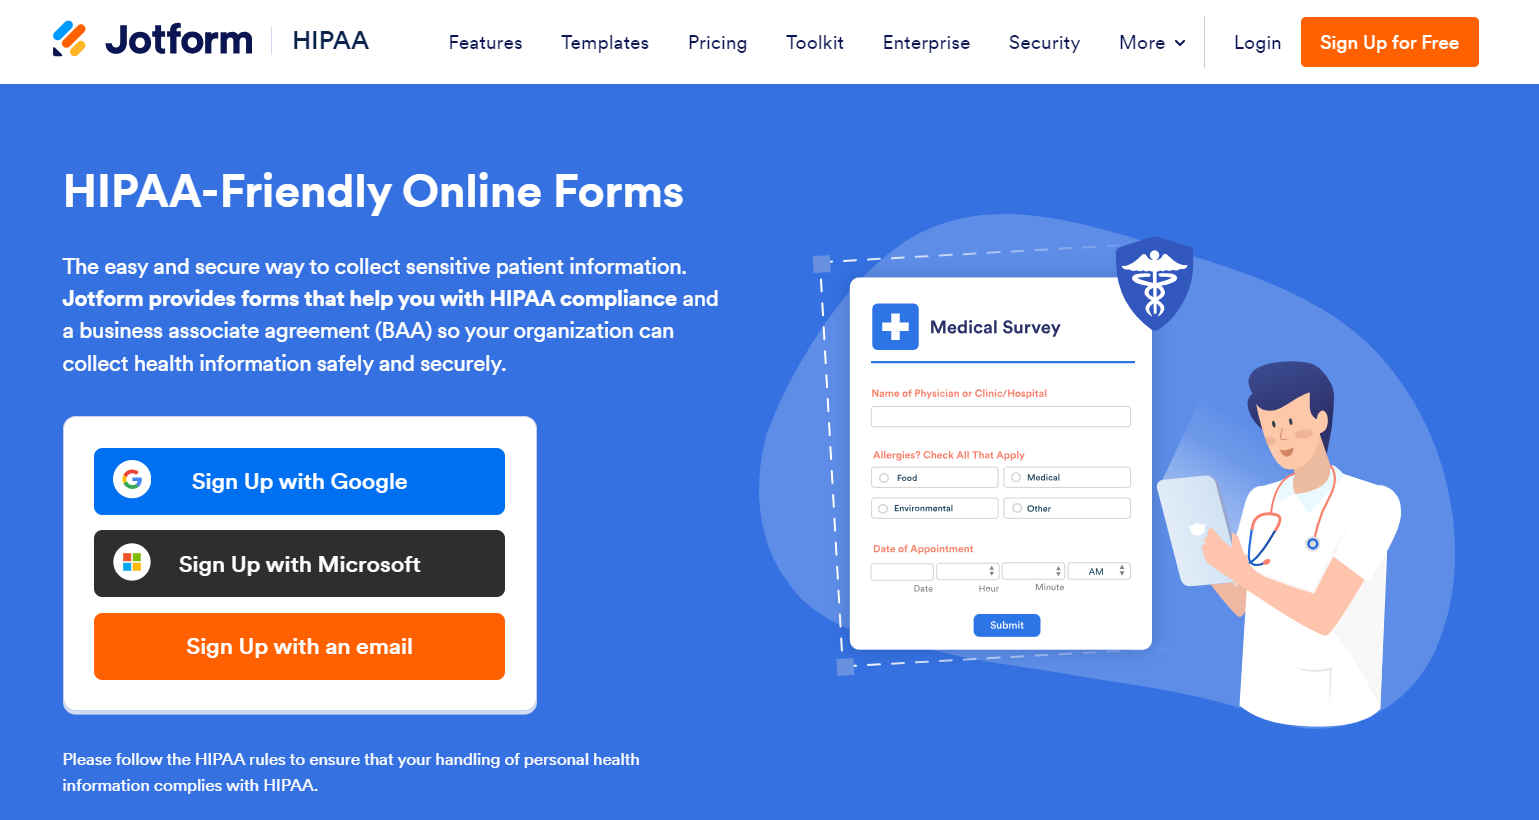 5 Best HIPAA-Compliant Contact Forms